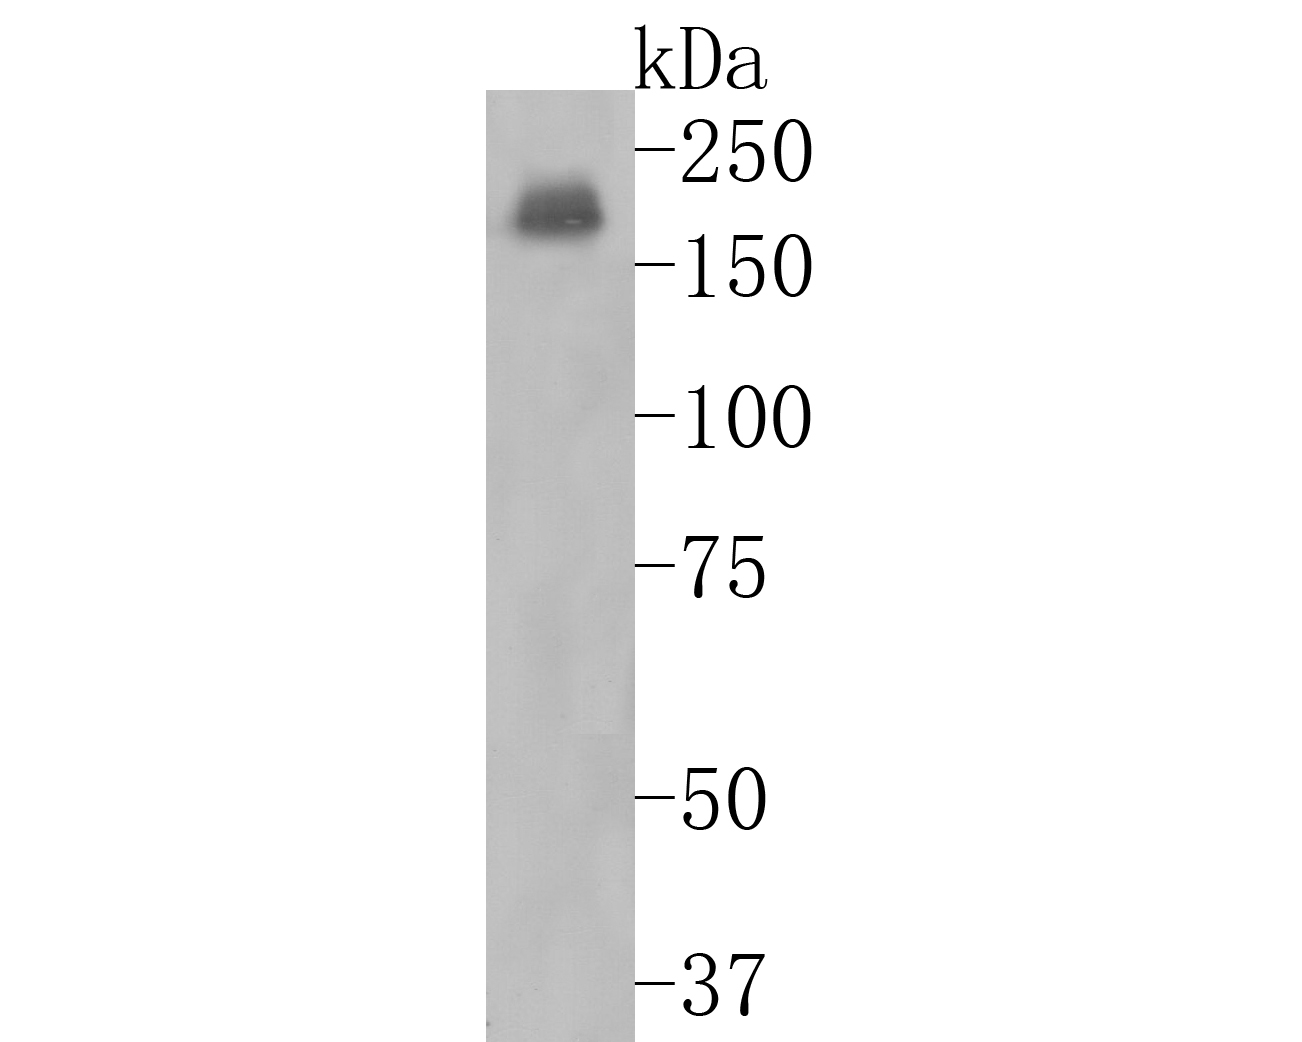 Western blot analysis of NMDAR2A on mouse hippocampus tissue lysates. Proteins were transferred to a PVDF membrane and blocked with 5% BSA in PBS for 1 hour at room temperature. The primary antibody (ET1704-80, 1/500) was used in 5% BSA at room temperature for 2 hours. Goat Anti-Rabbit IgG - HRP Secondary Antibody (HA1001) at 1:5,000 dilution was used for 1 hour at room temperature.